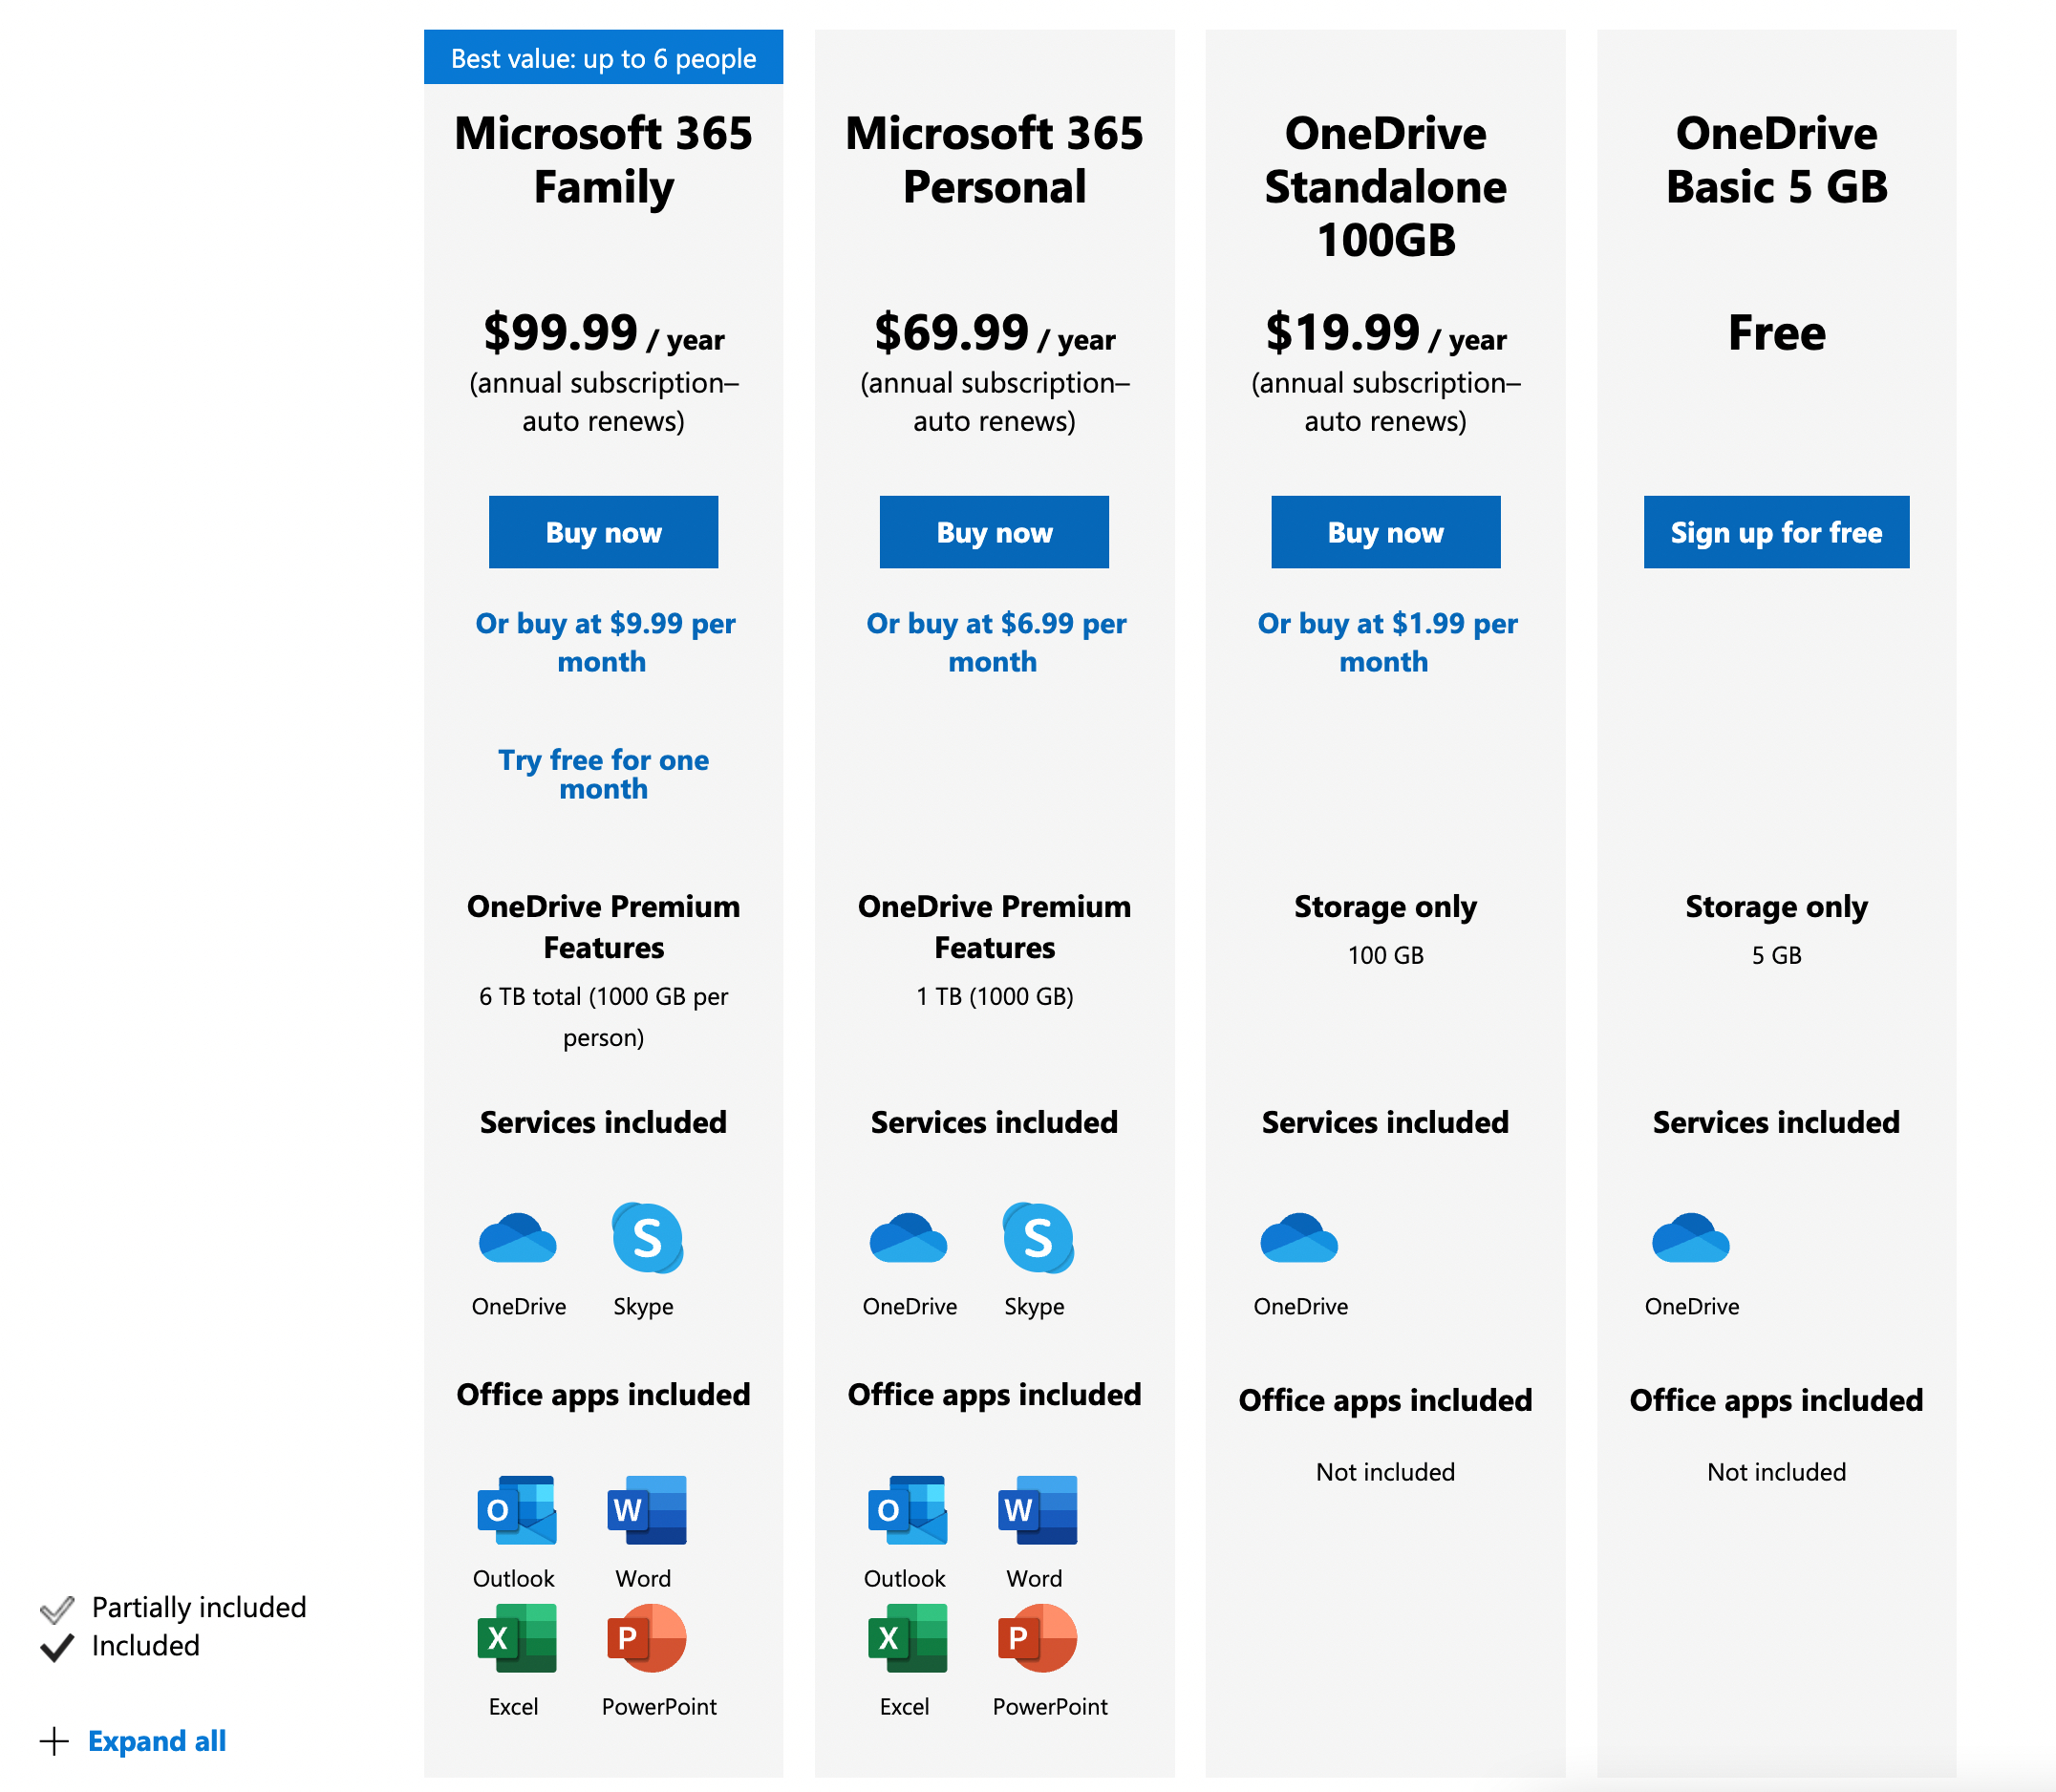 How To Use OneDrive: A Guide To Microsoft's Cloud Storage Service